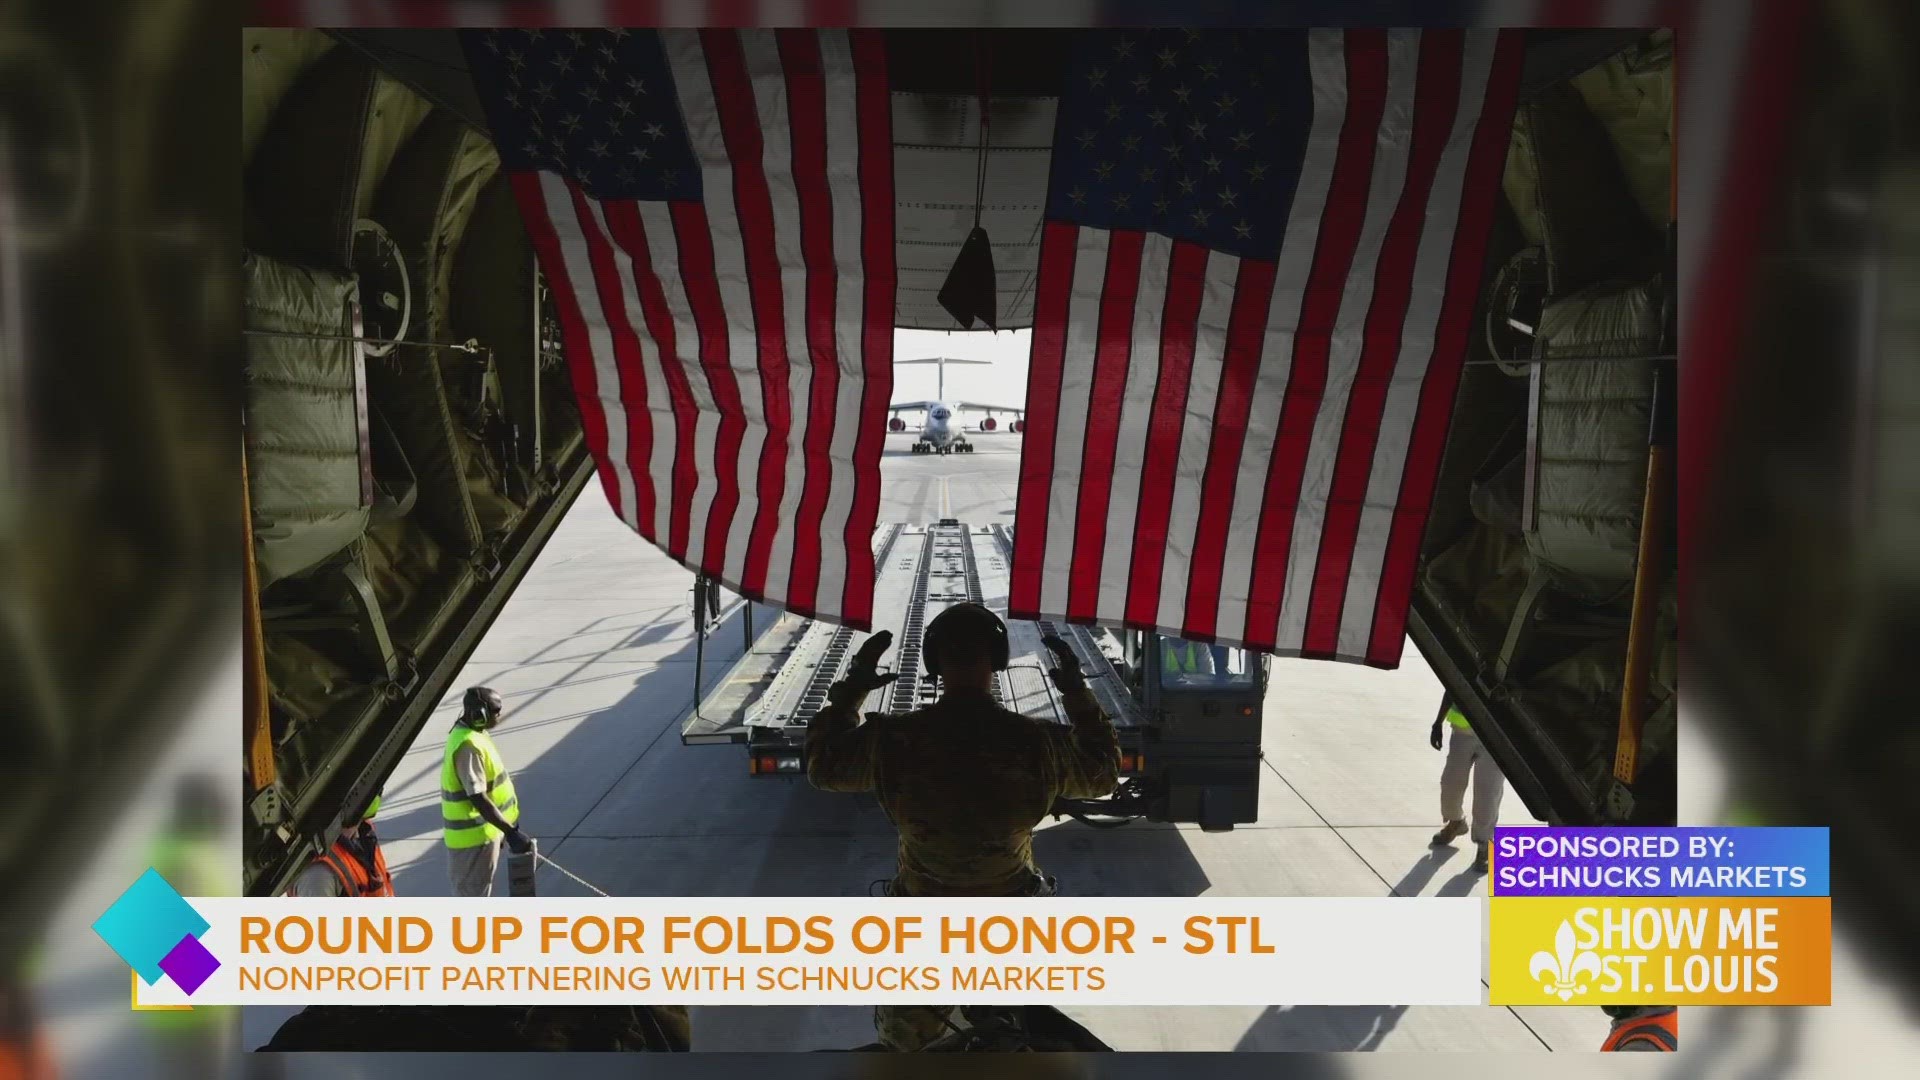 Folds of Honor St. Louis and Schnucks are once again teaming up for the round up program, marking the 6th consecutive year!